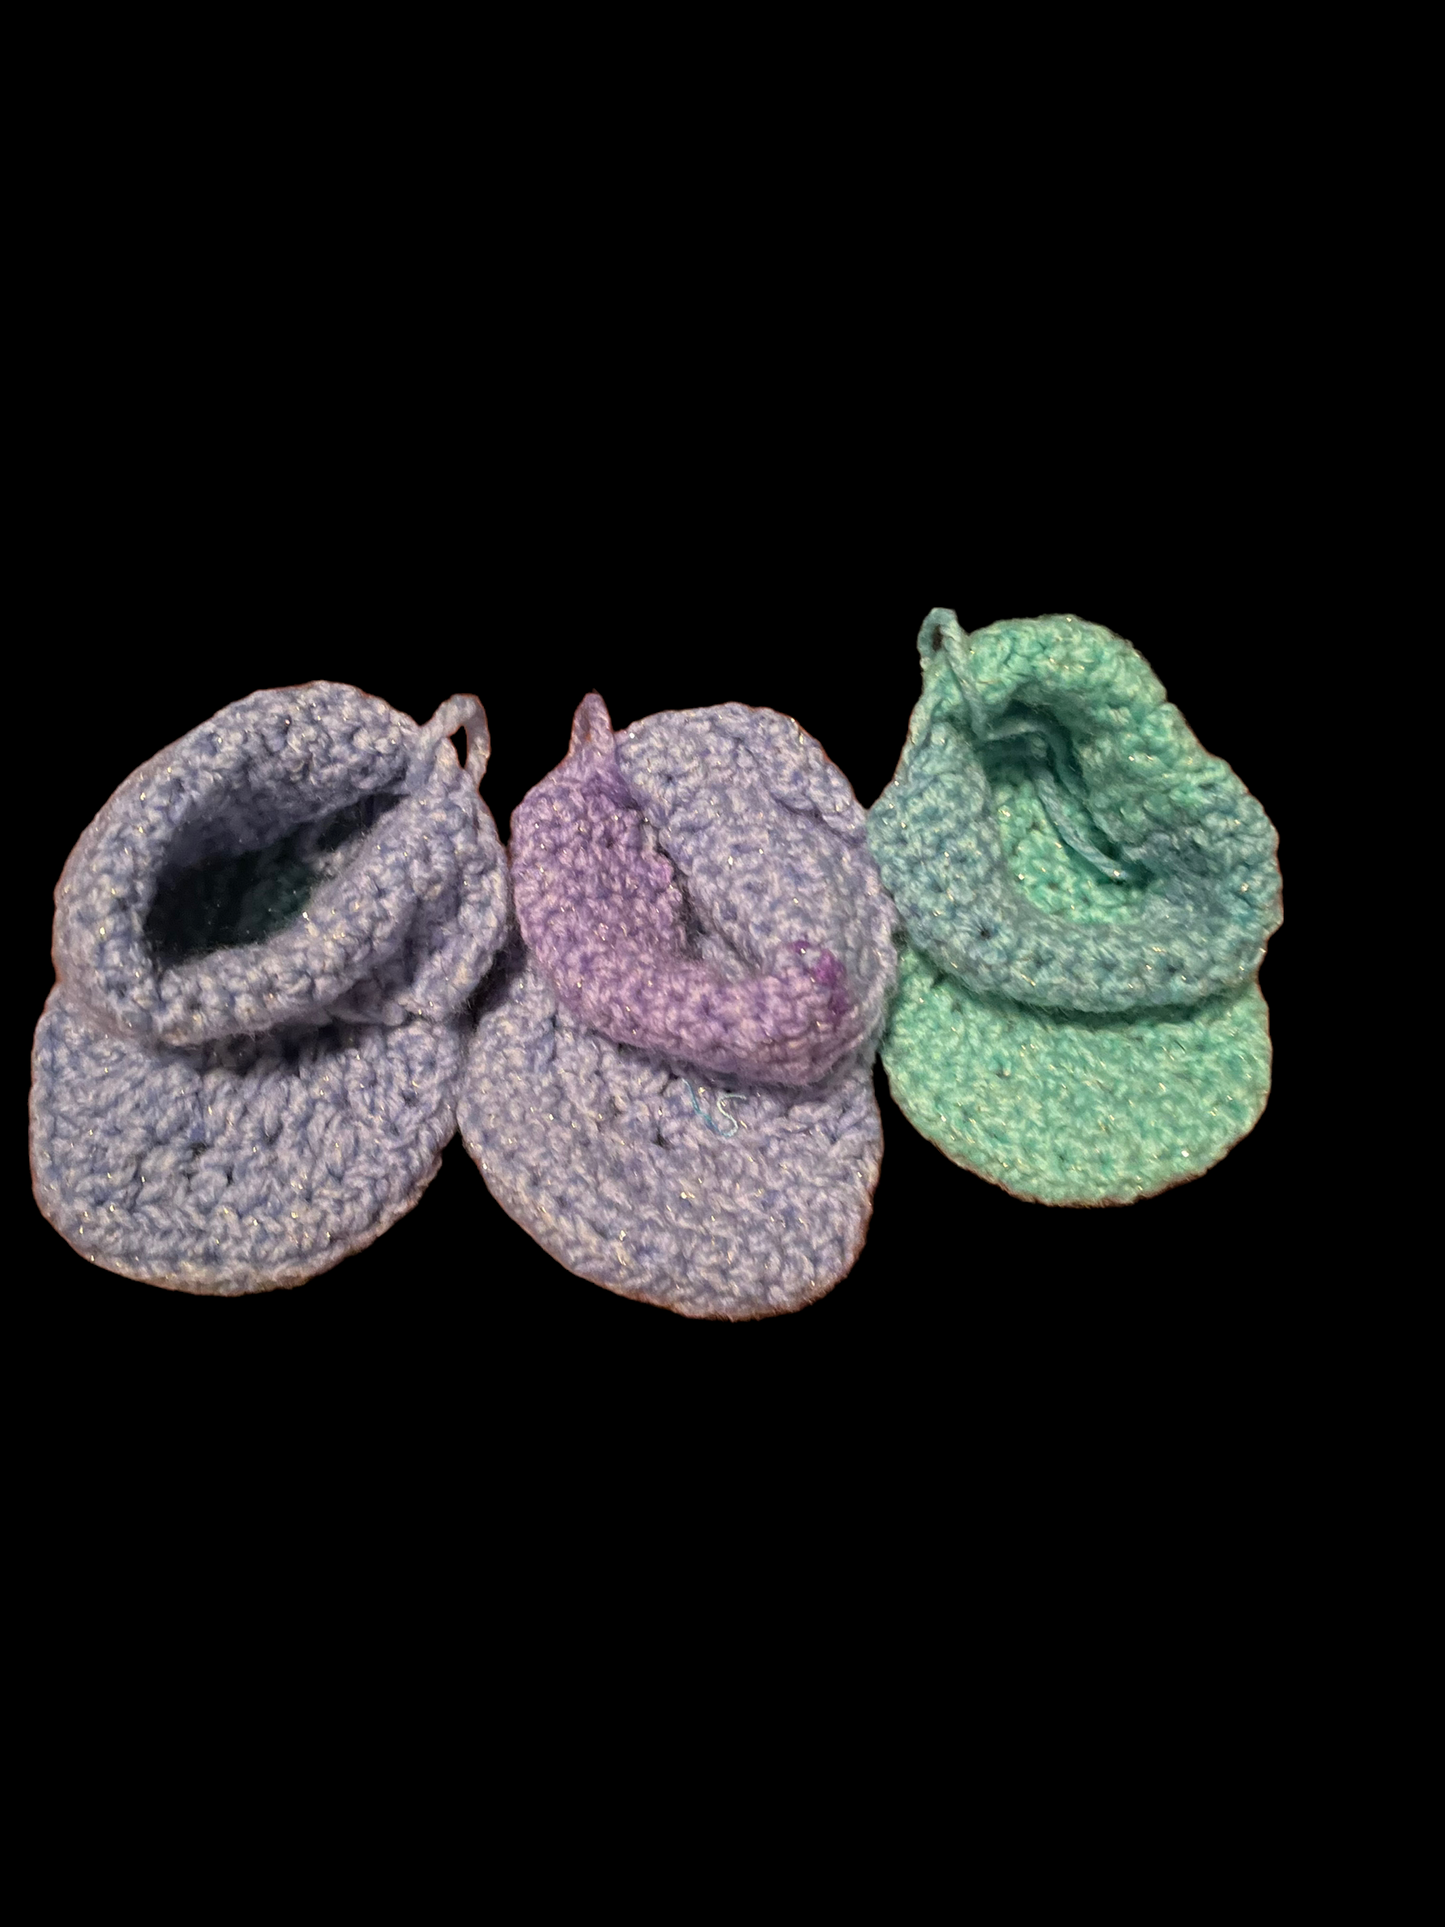 Pastel Infant Blanket &3 Mix-n-Match Baby Booties